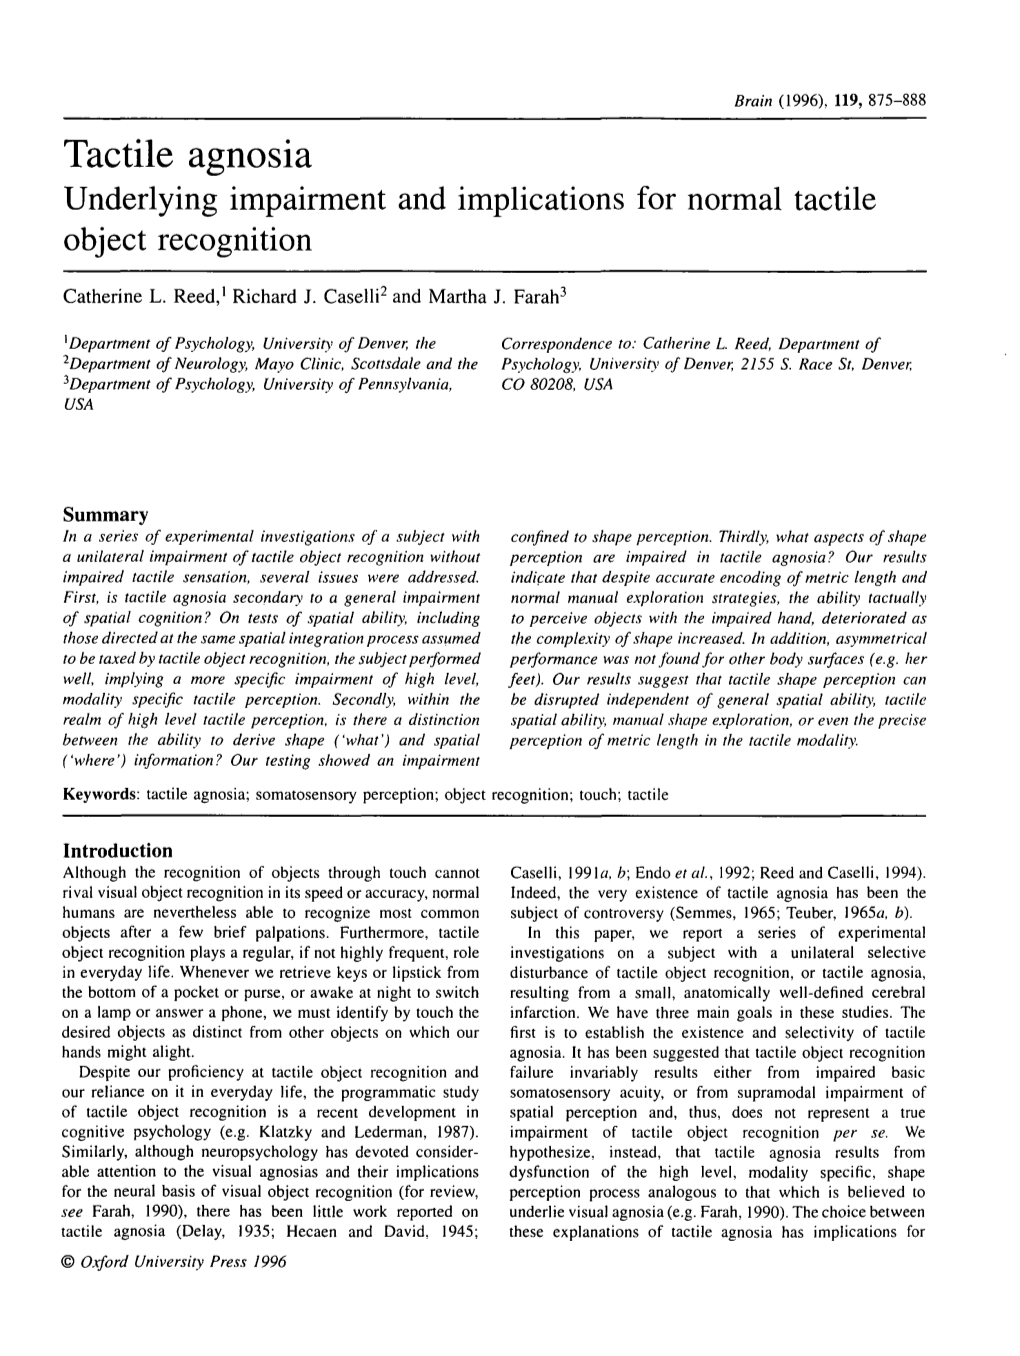 Tactile Agnosia Underlying Impairment and Implications for Normal Tactile Object Recognition